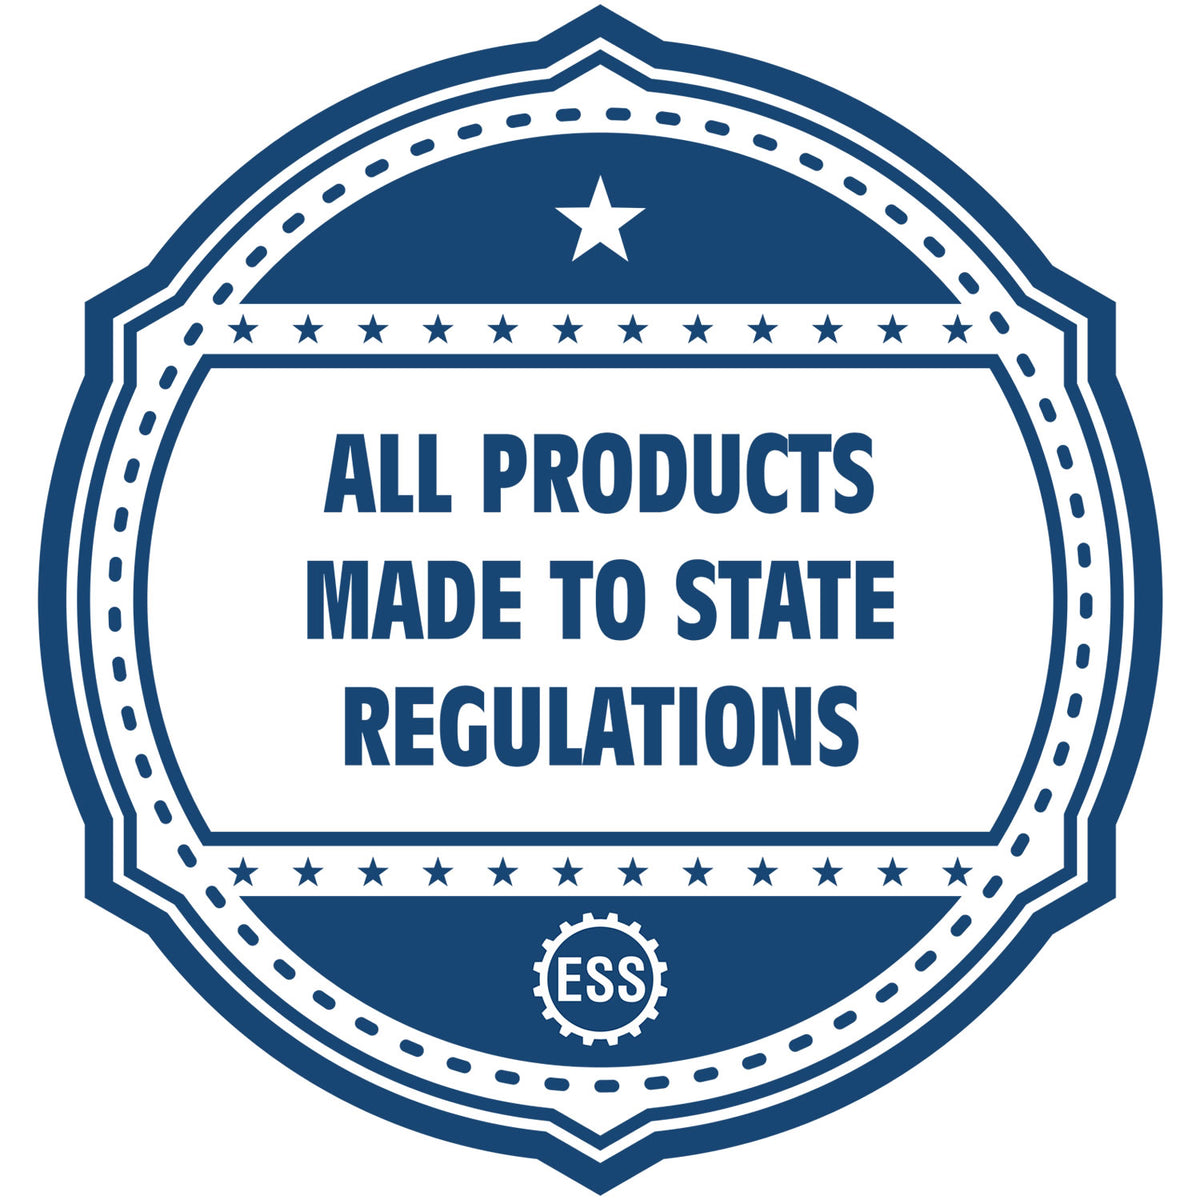 An icon or badge element for the Long Reach Kentucky PE Seal showing that this product is made in compliance with state regulations.